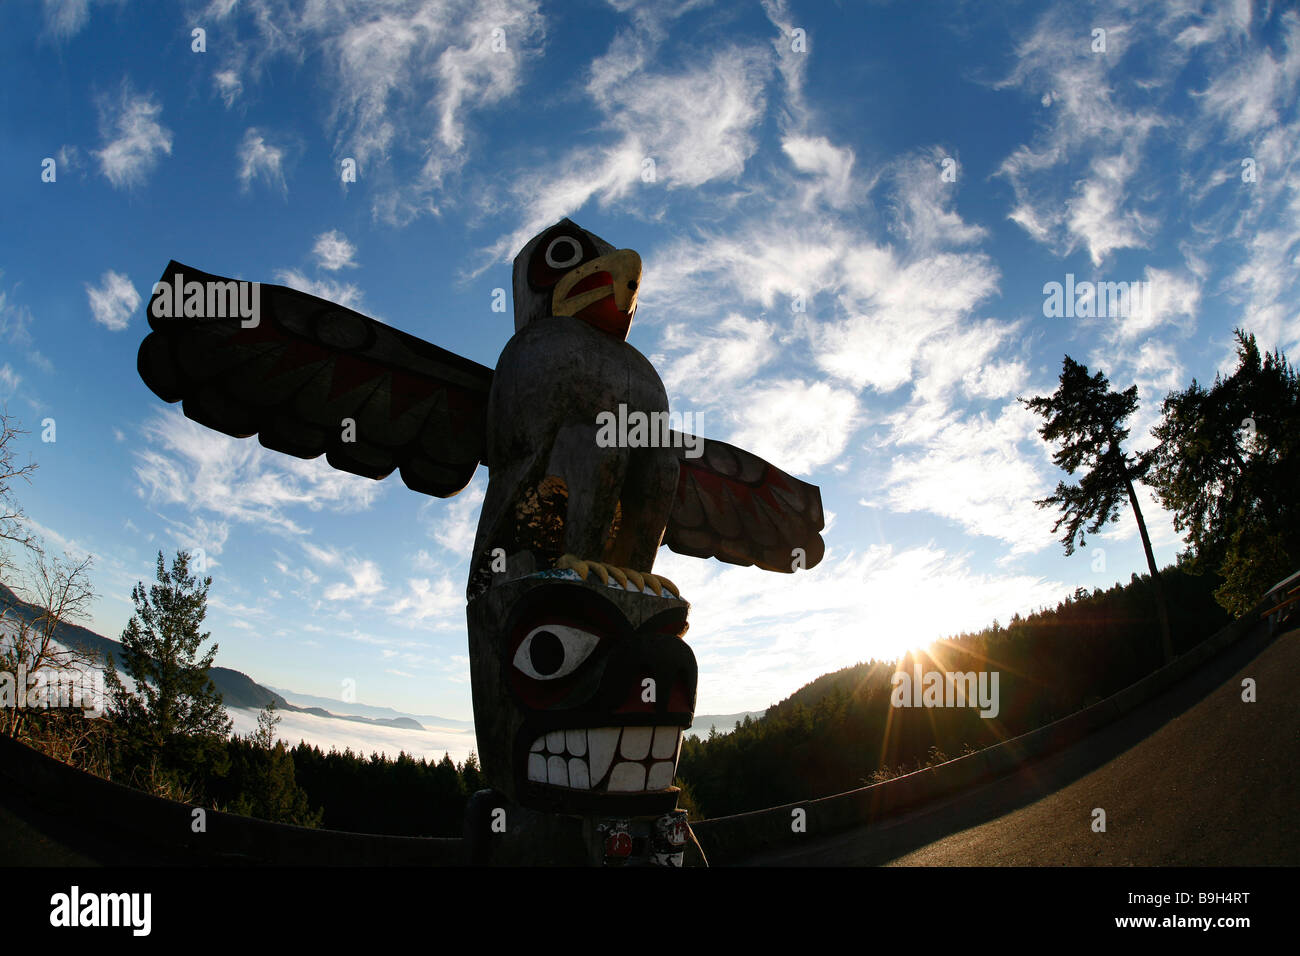 A totem pole at the Malahat Summit overlooking the Saanich Inlet at sunset on Vancouver Island, Canada. Stock Photo